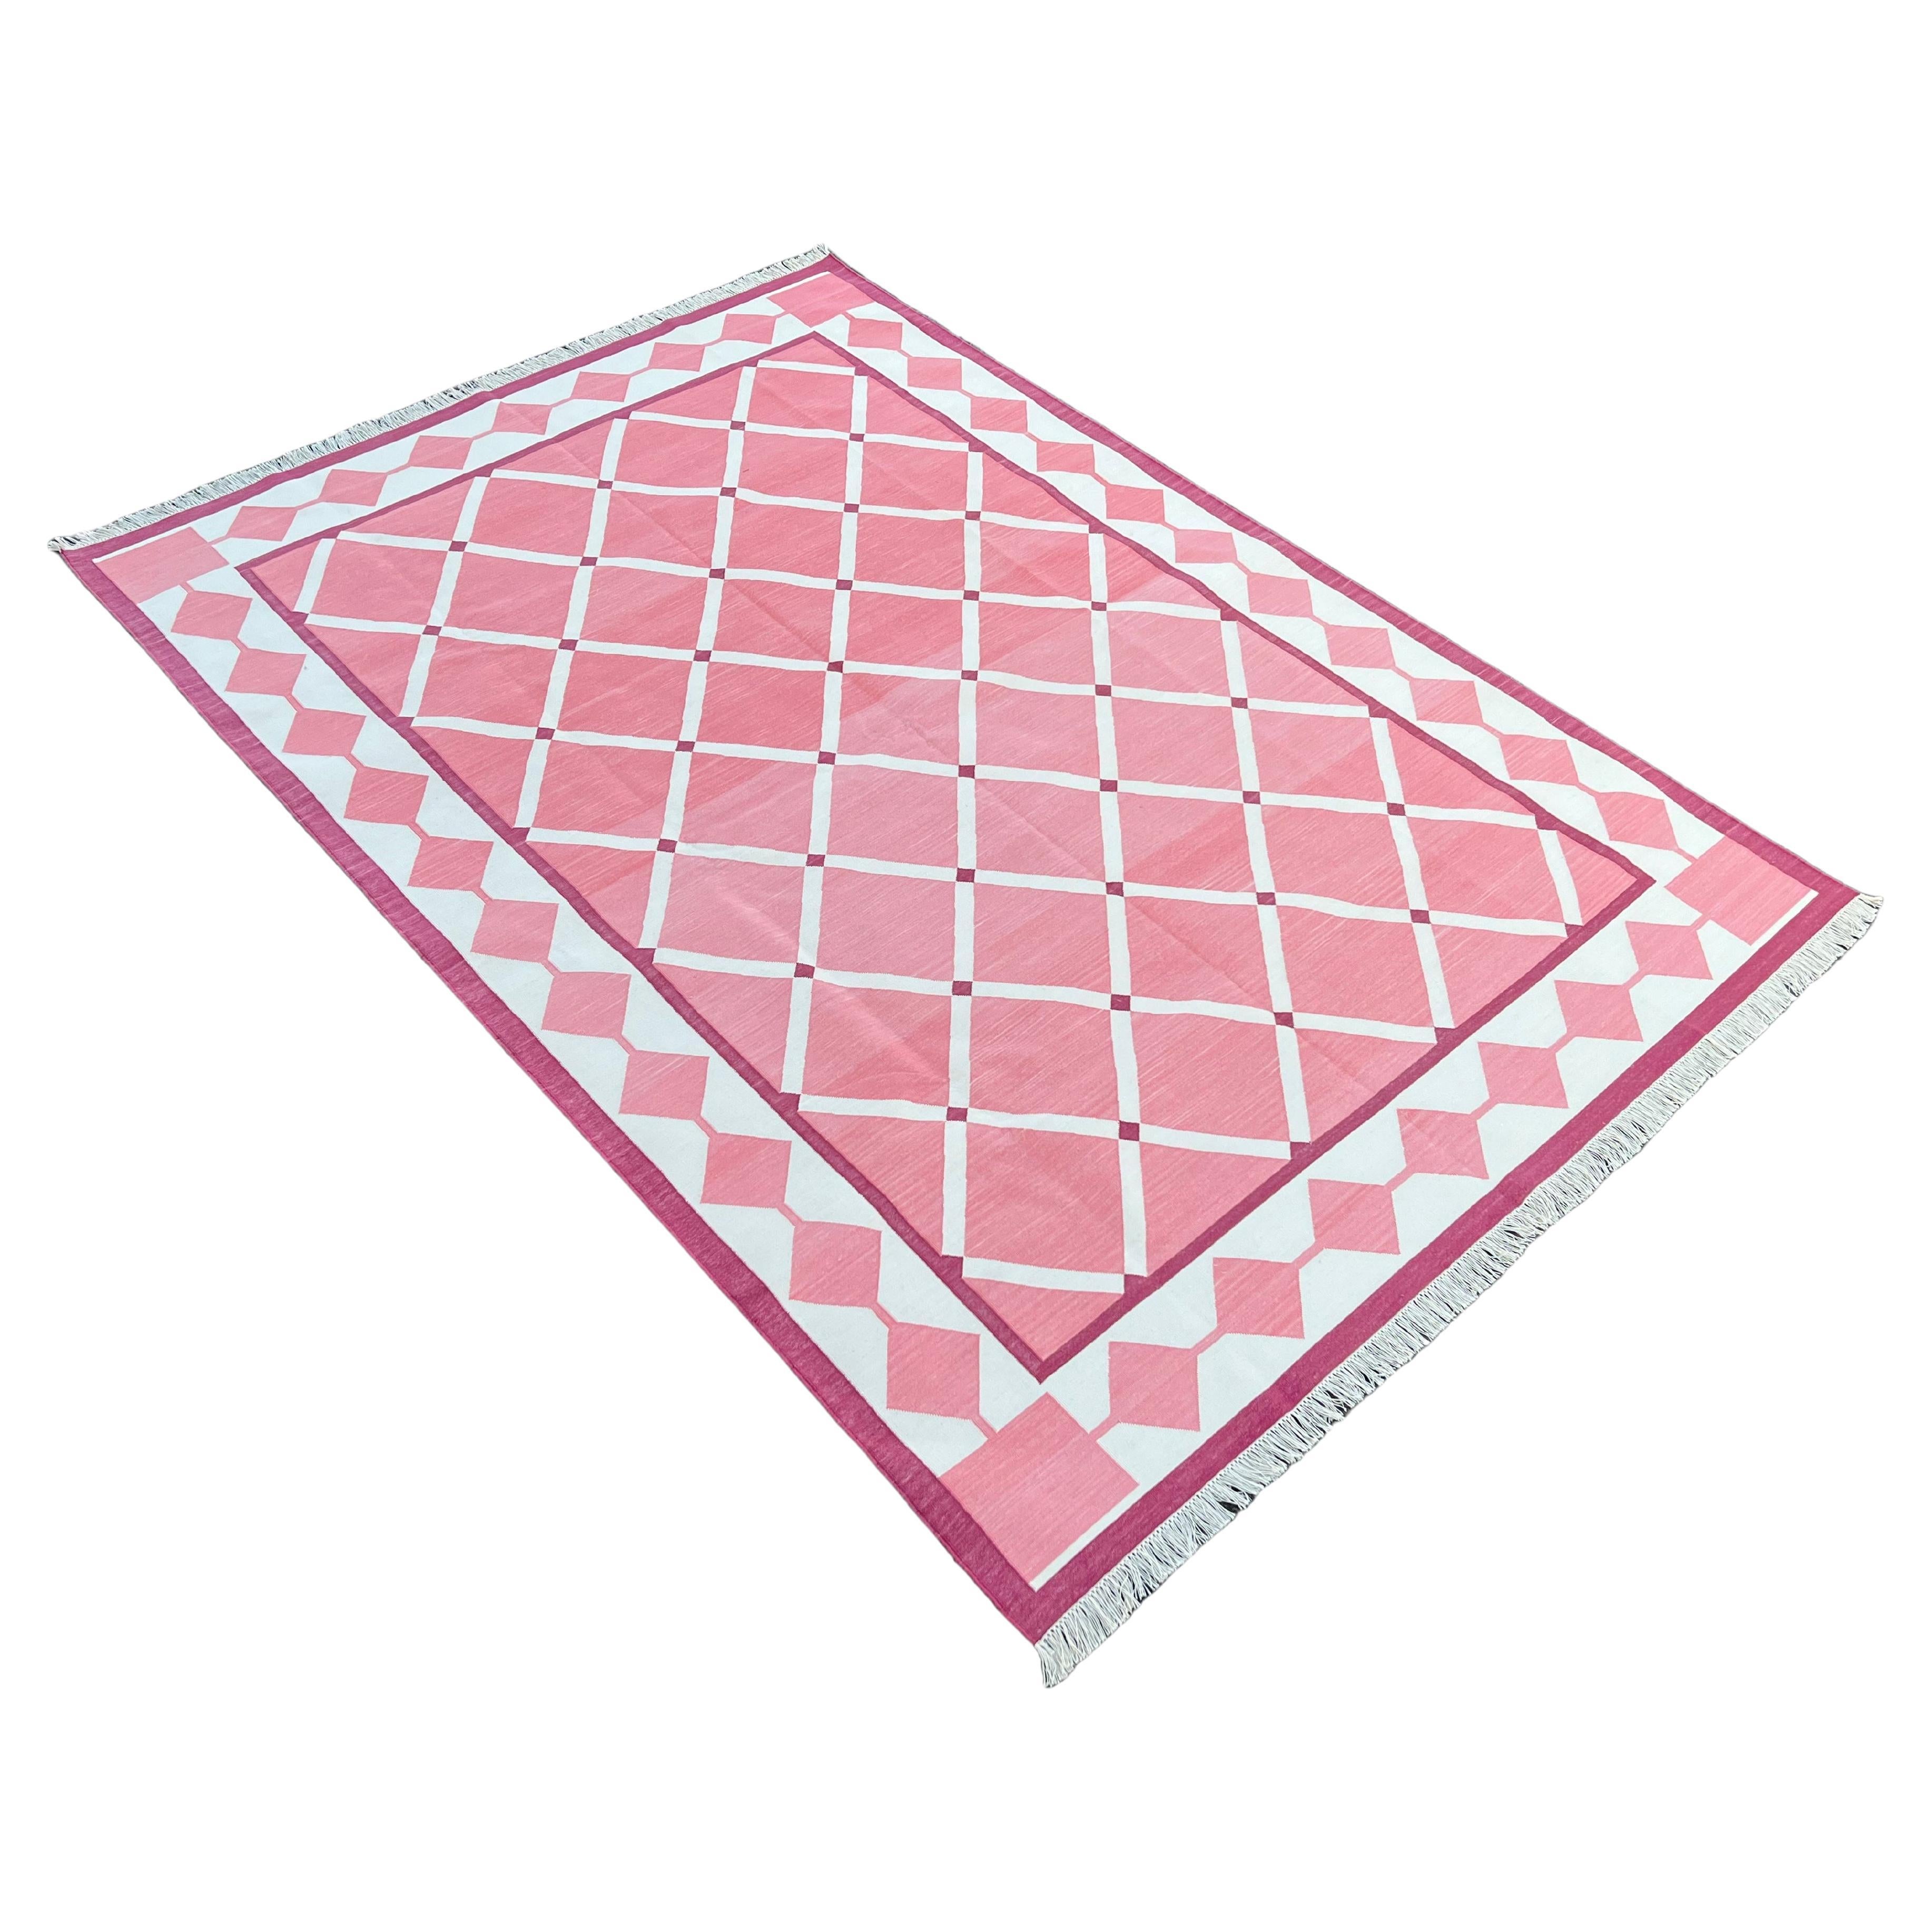 Handmade Cotton Area Flat Weave Rug, 6x9 Pink And White Geometric Indian Dhurrie